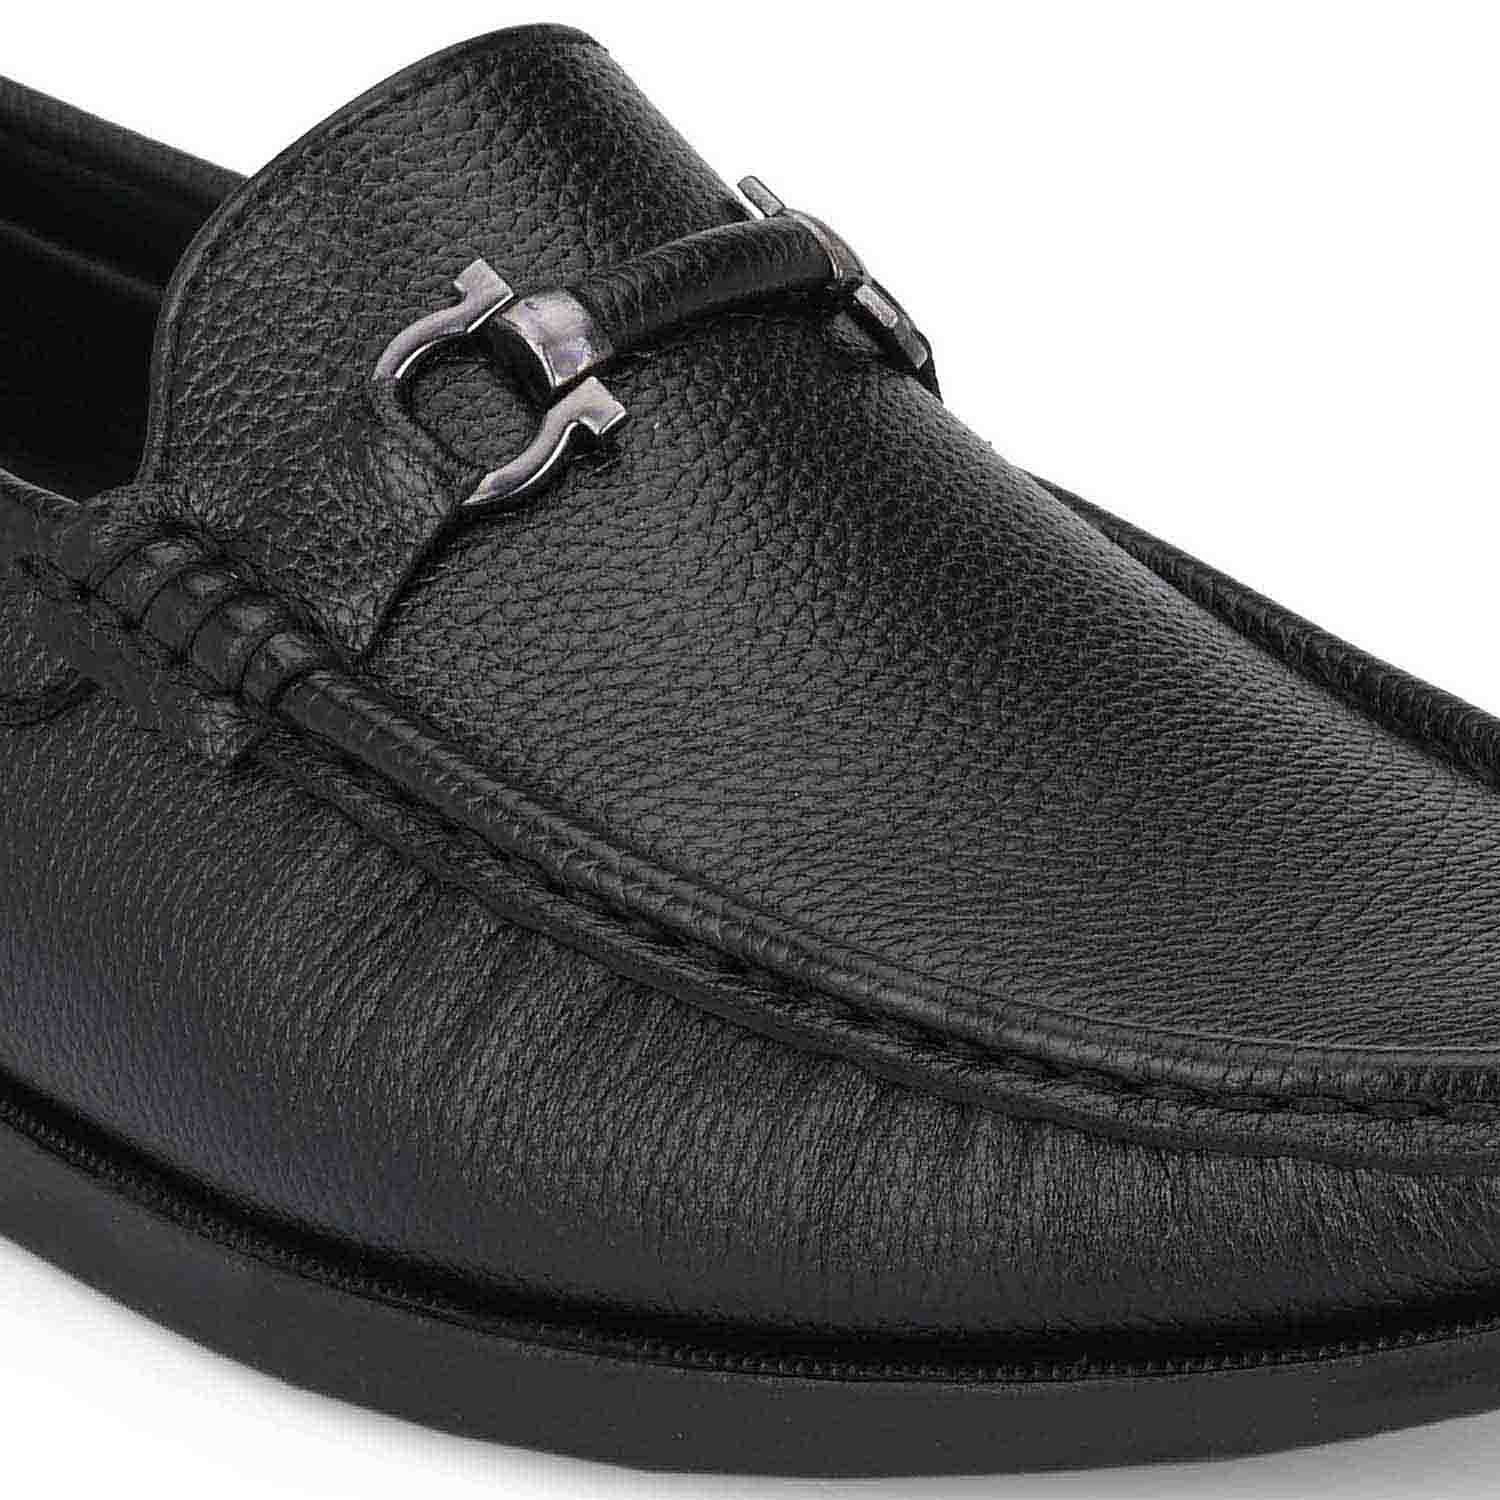 Pair-it Men's Loafers Shoes - Black-LZ-Loafer109